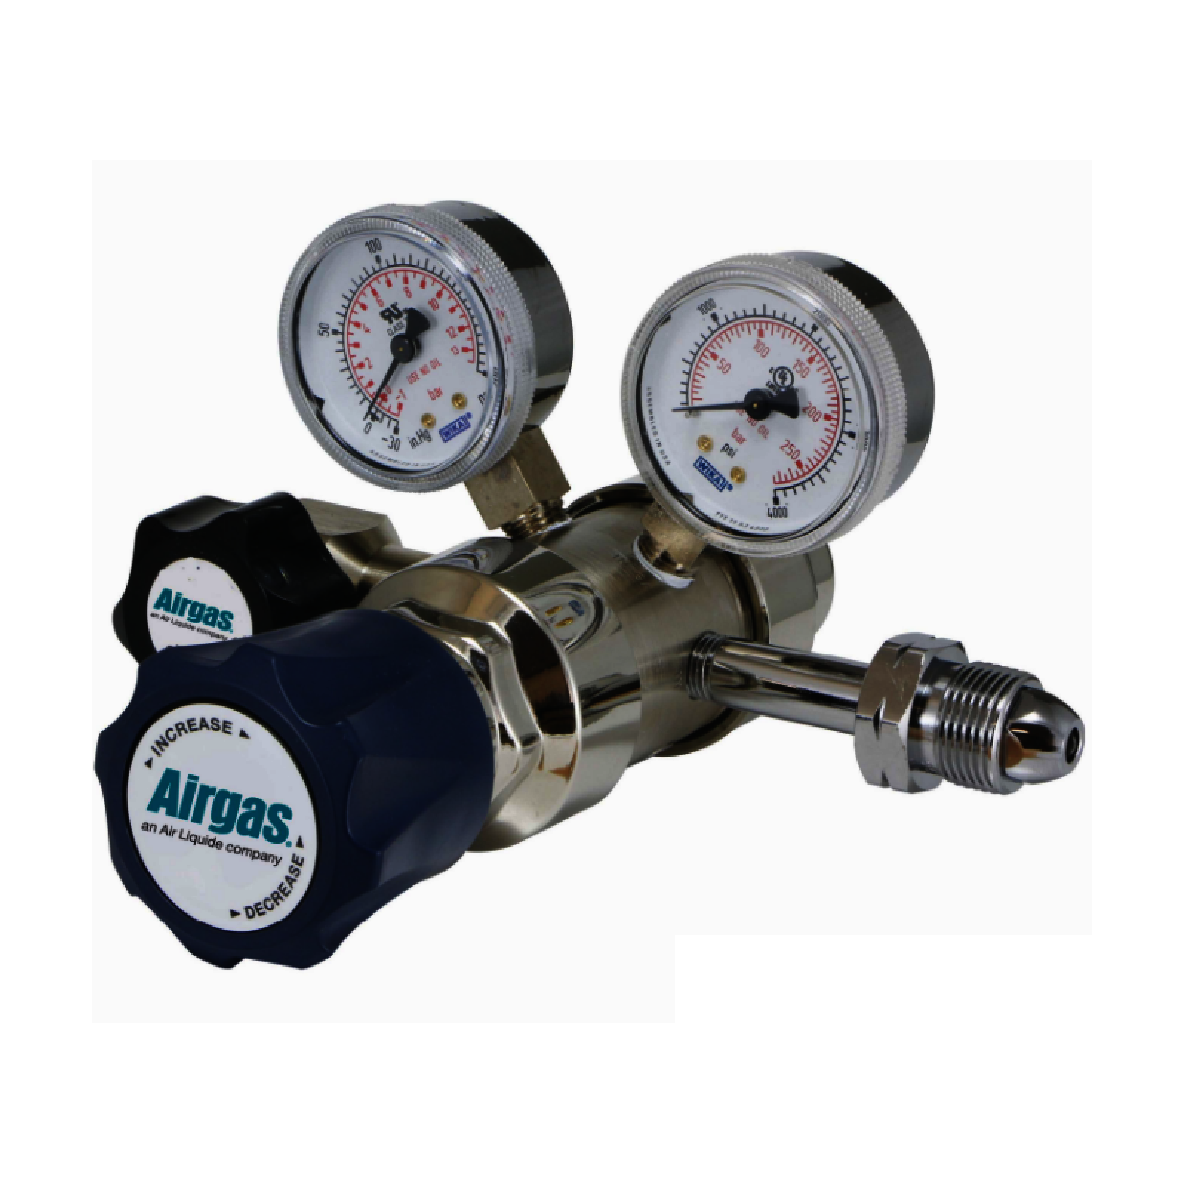 Airgas Model 311D590 Brass-Plated Bar Stock Noncorrosive Gas Two Stage Regulator With CGA-590 Connection